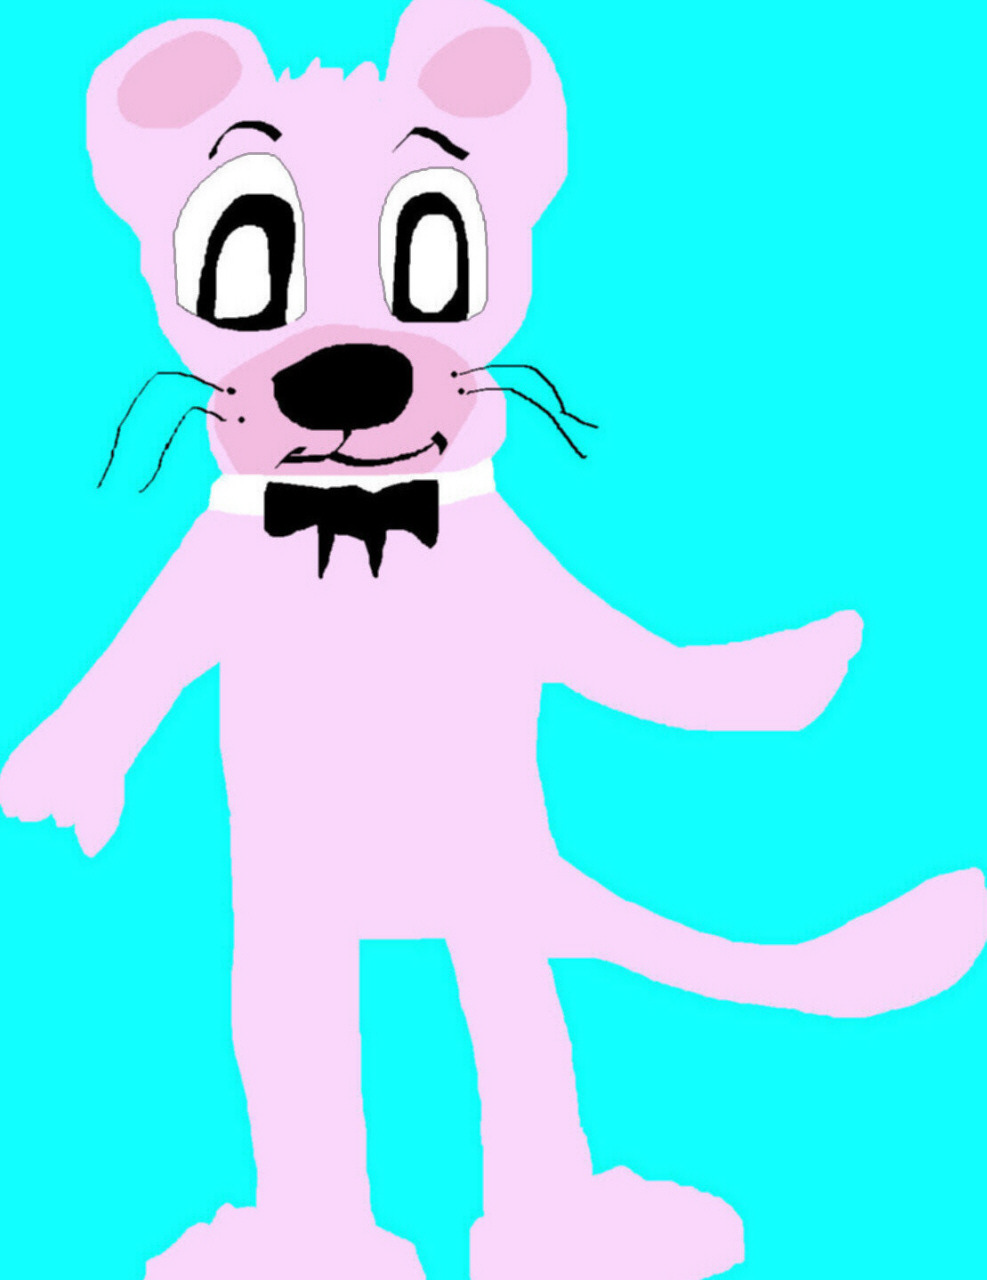 The Pink Panther In Hanna Barbera Style MS Paint^^ by Falconlobo